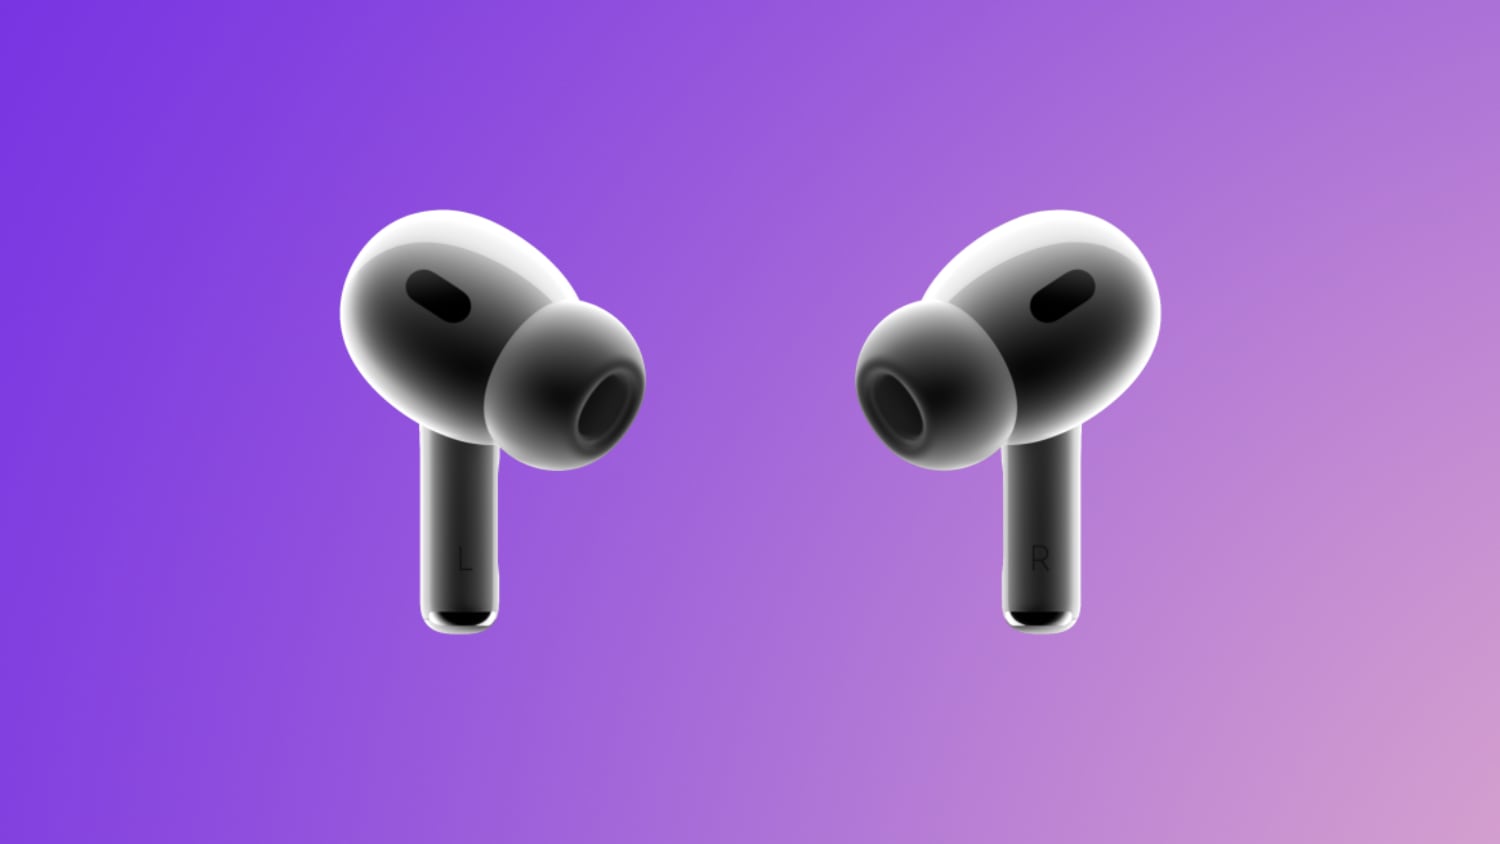 Deals: Take $69 Off AirPods Pro With MagSafe and $9 Off AirPods Pro 2 on Amazon